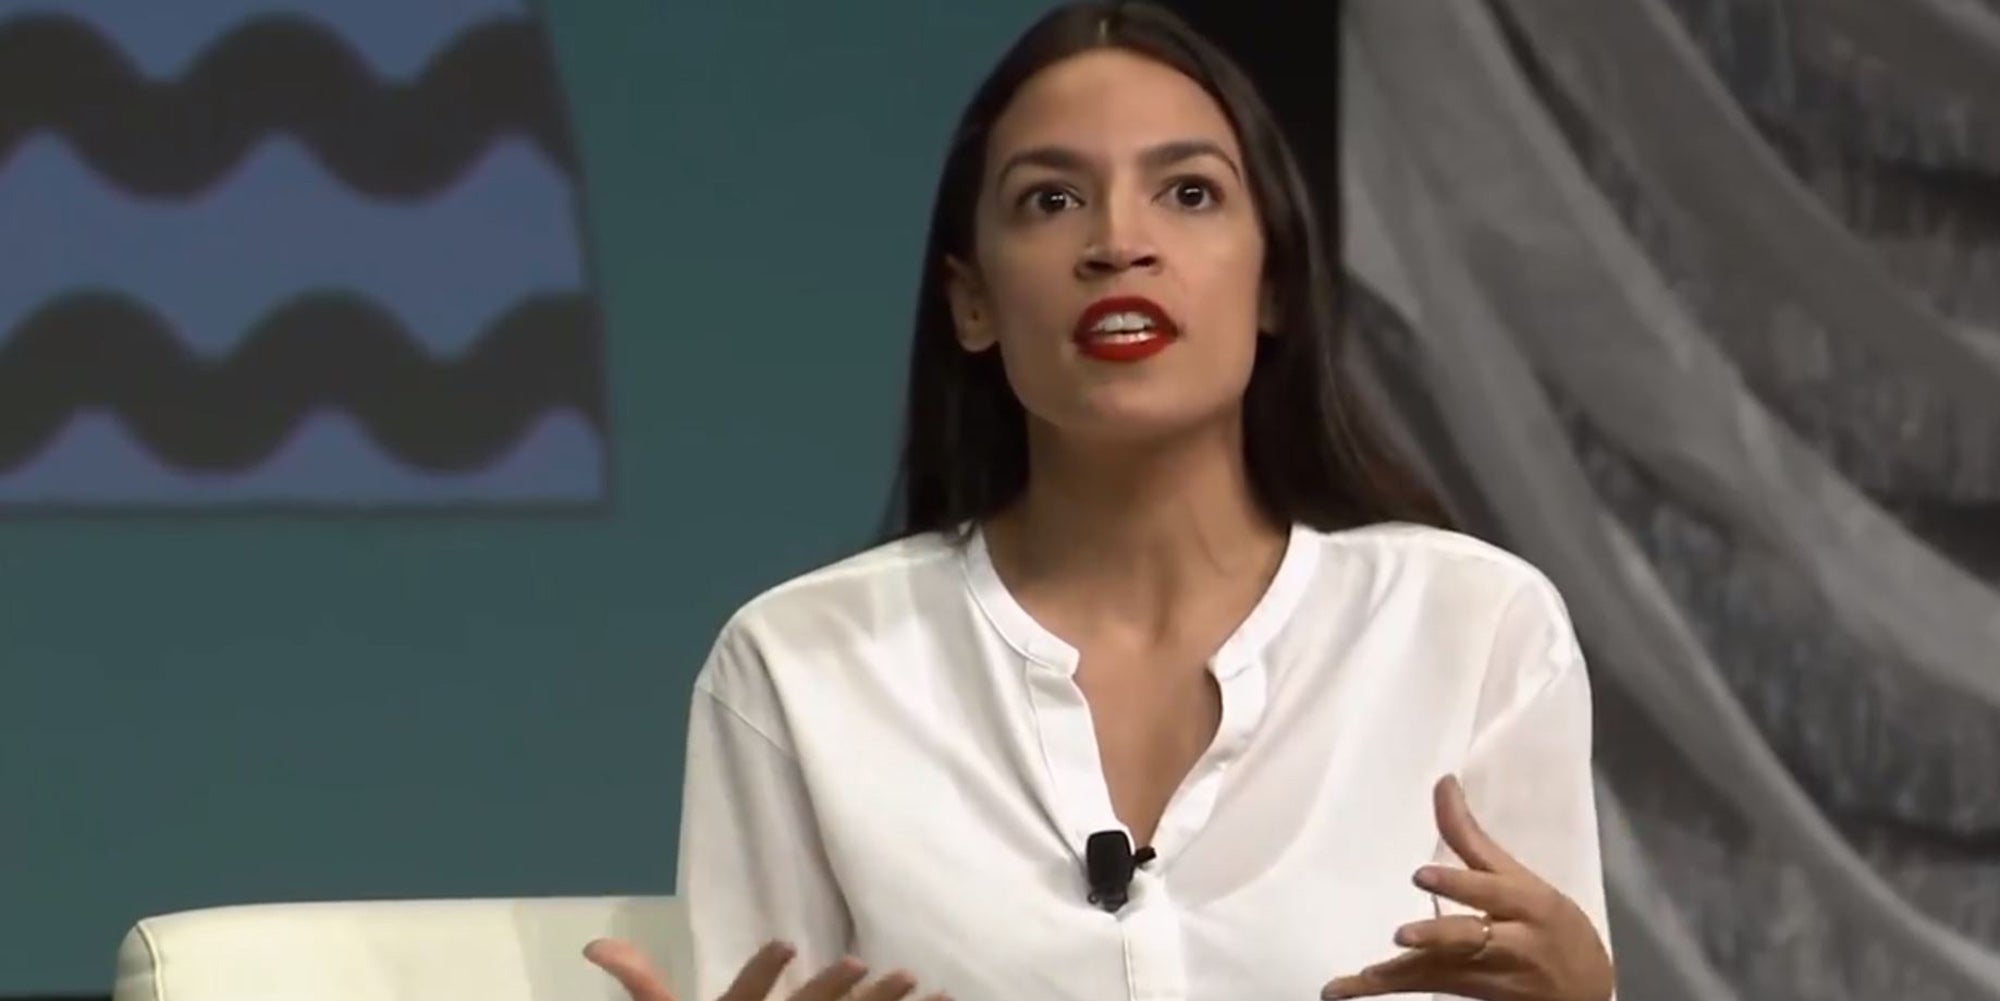 Alexandria Ocasio-Cortez sums up moderates during panel at SXSW in Texas | indy1002000 x 1001